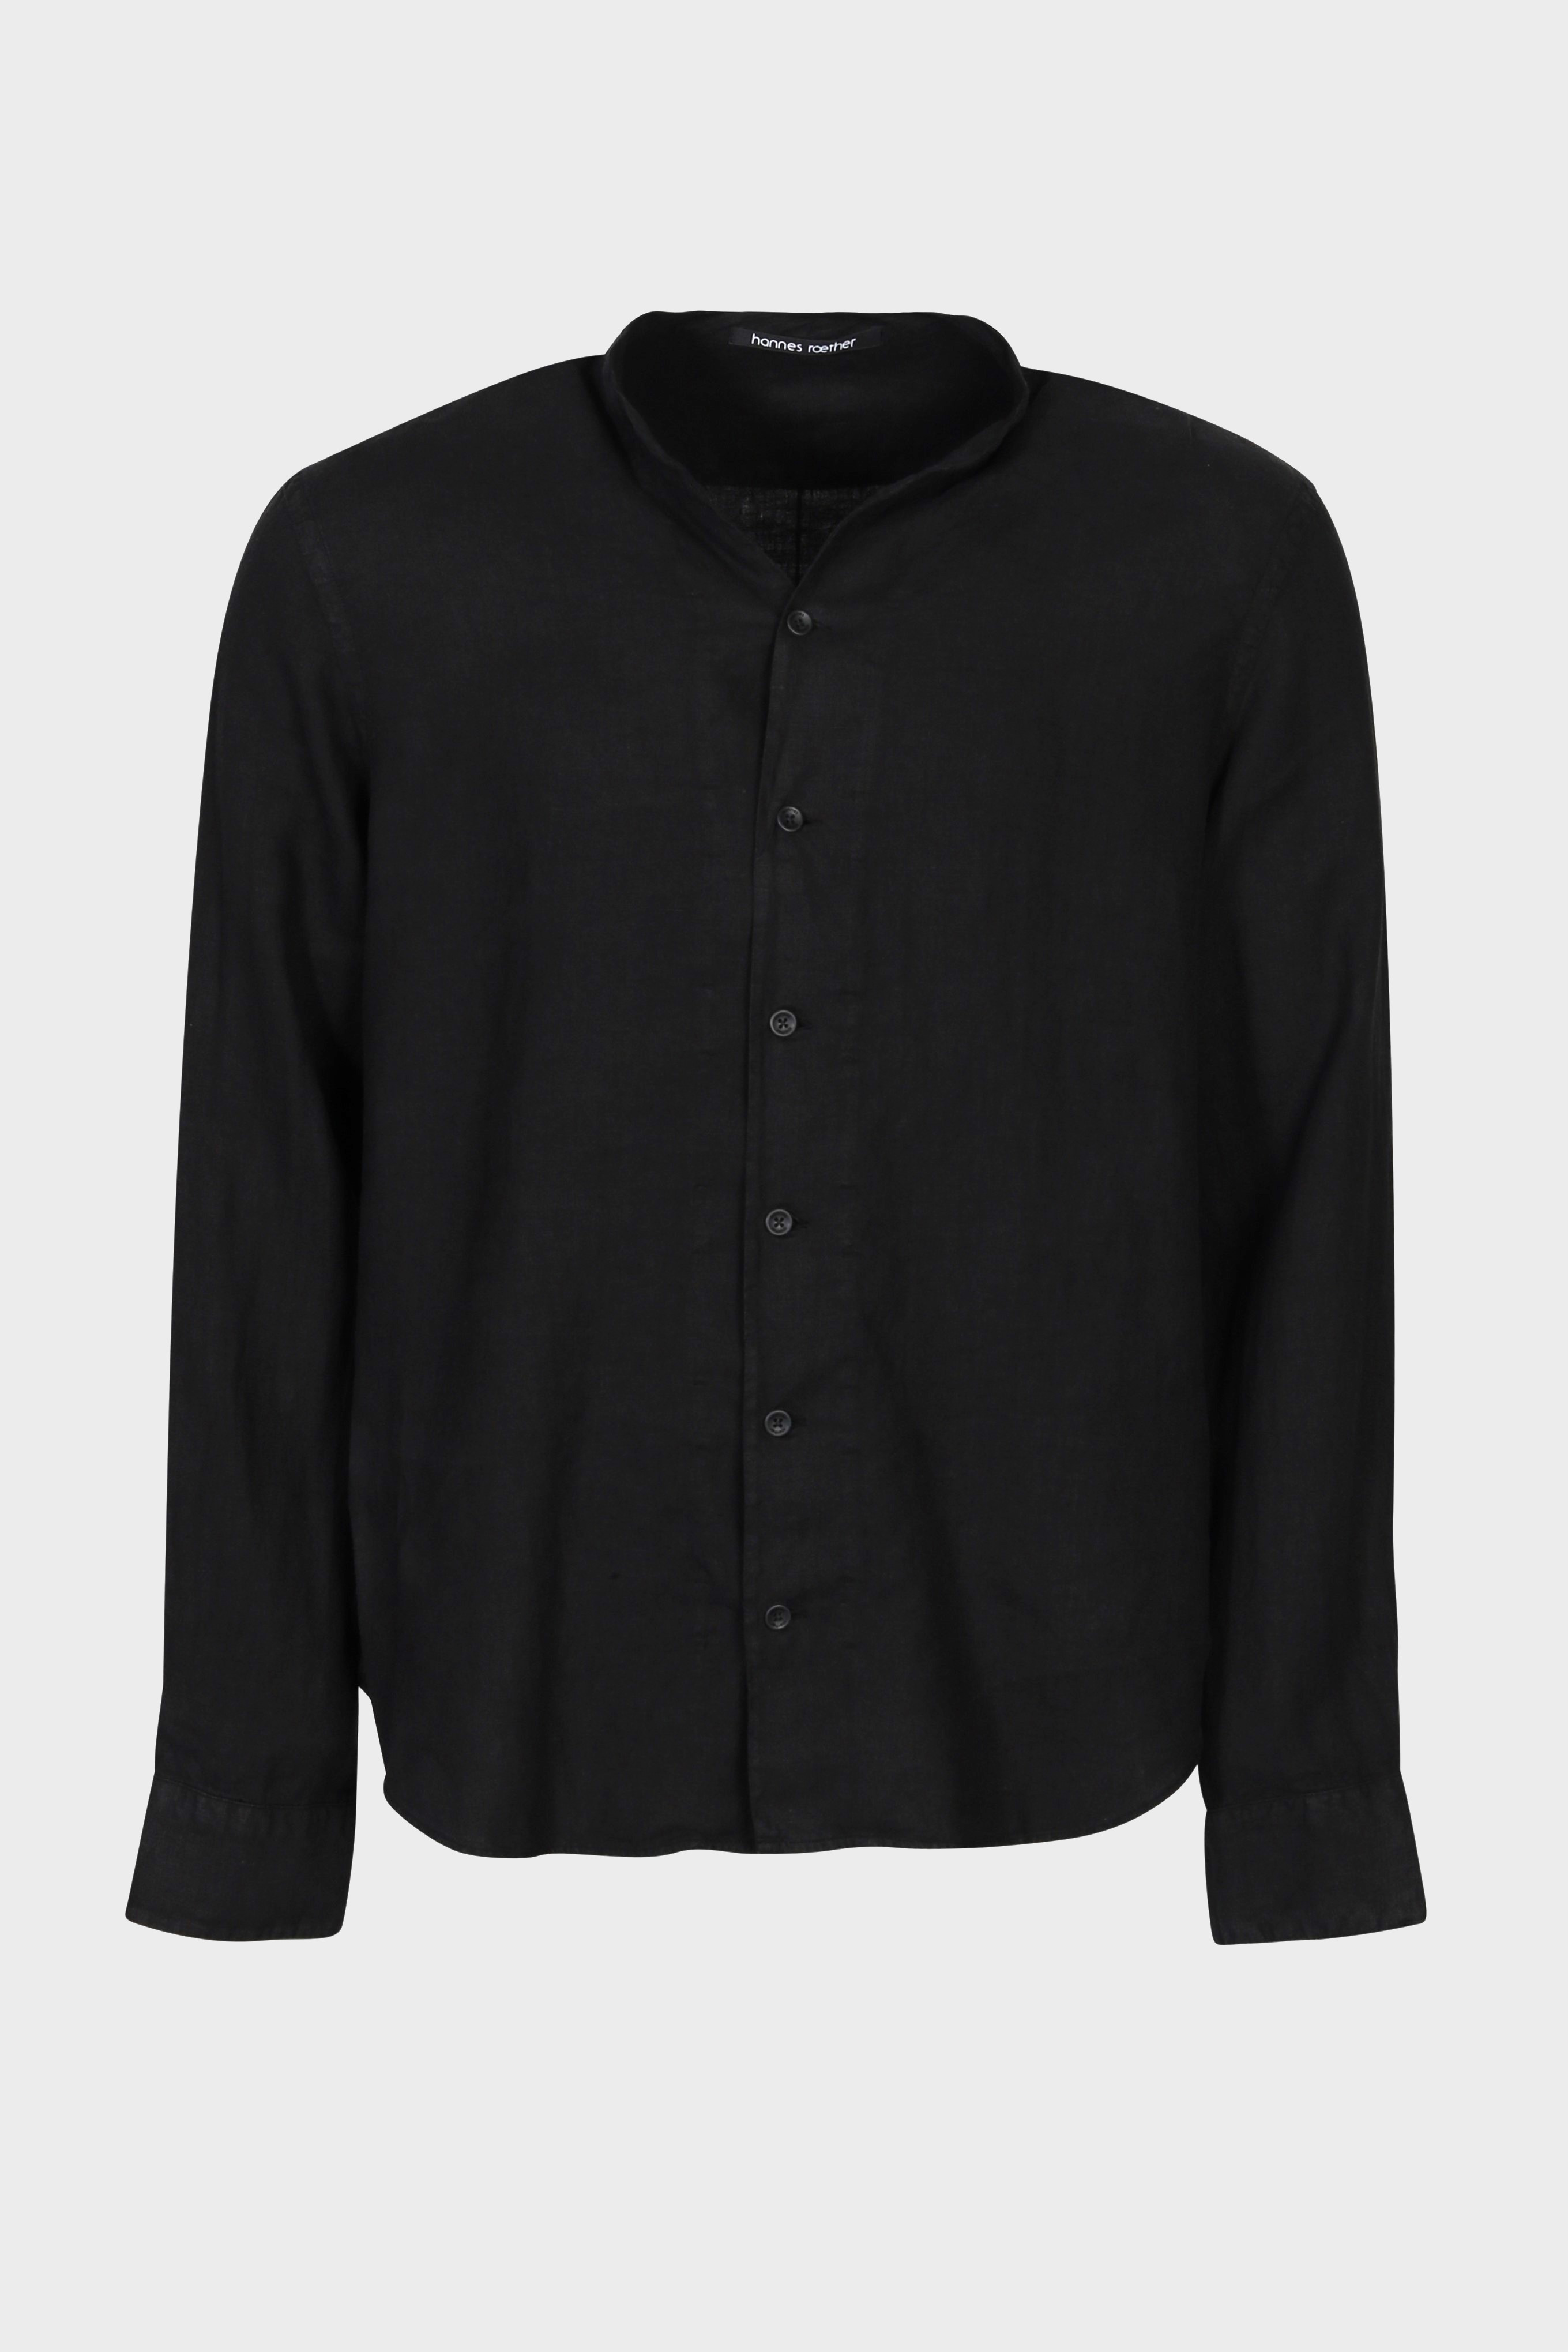 HANNES ROETHER Linen Shirt in Black